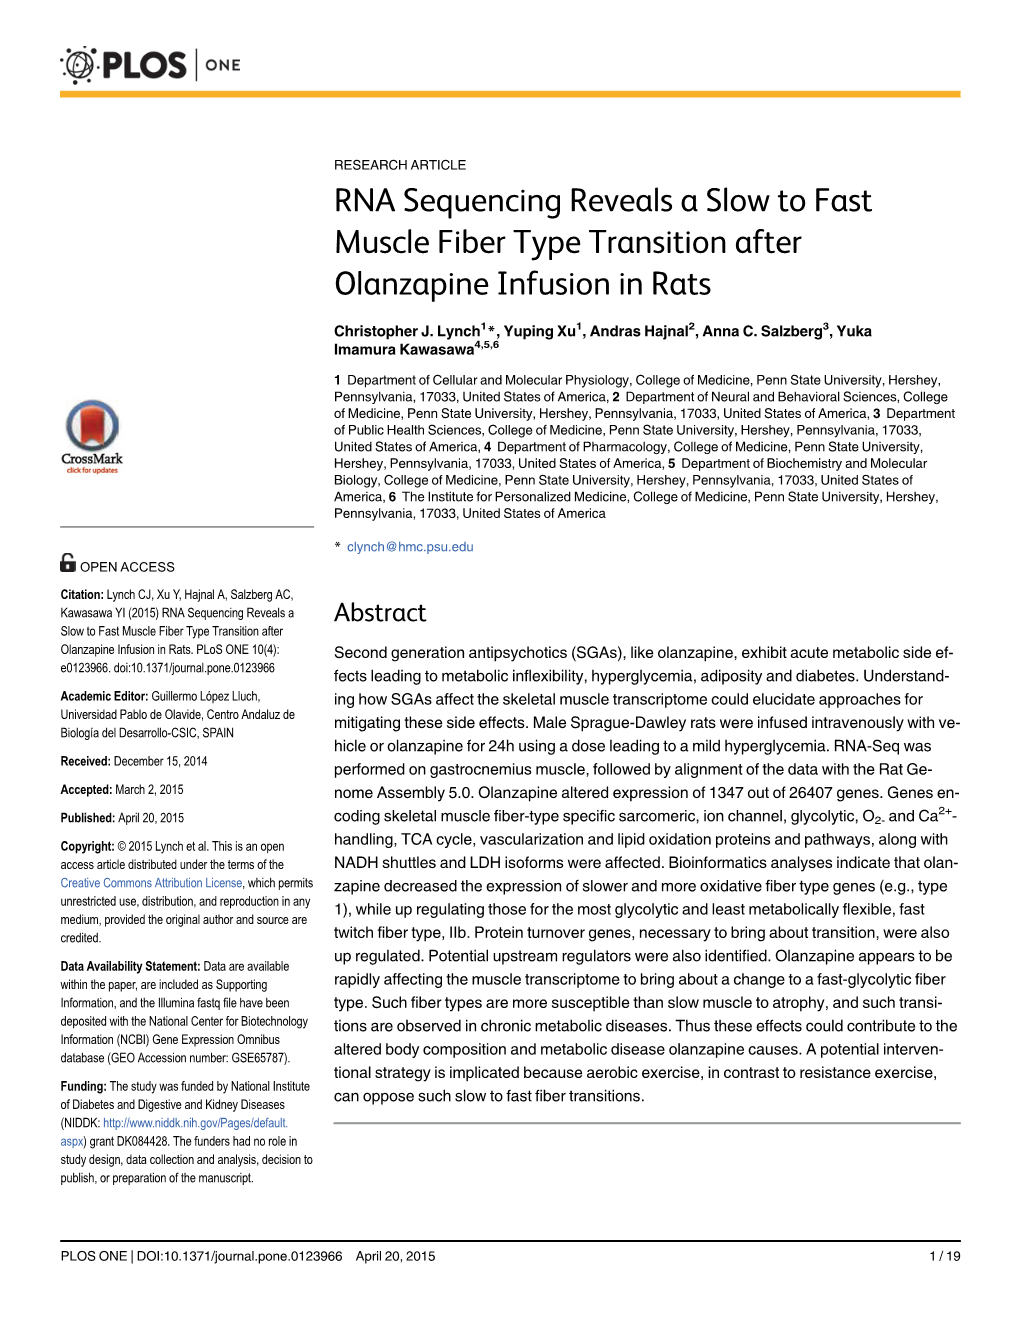 RNA Sequencing Reveals a Slow to Fast Muscle Fiber Type Transition After Olanzapine Infusion in Rats